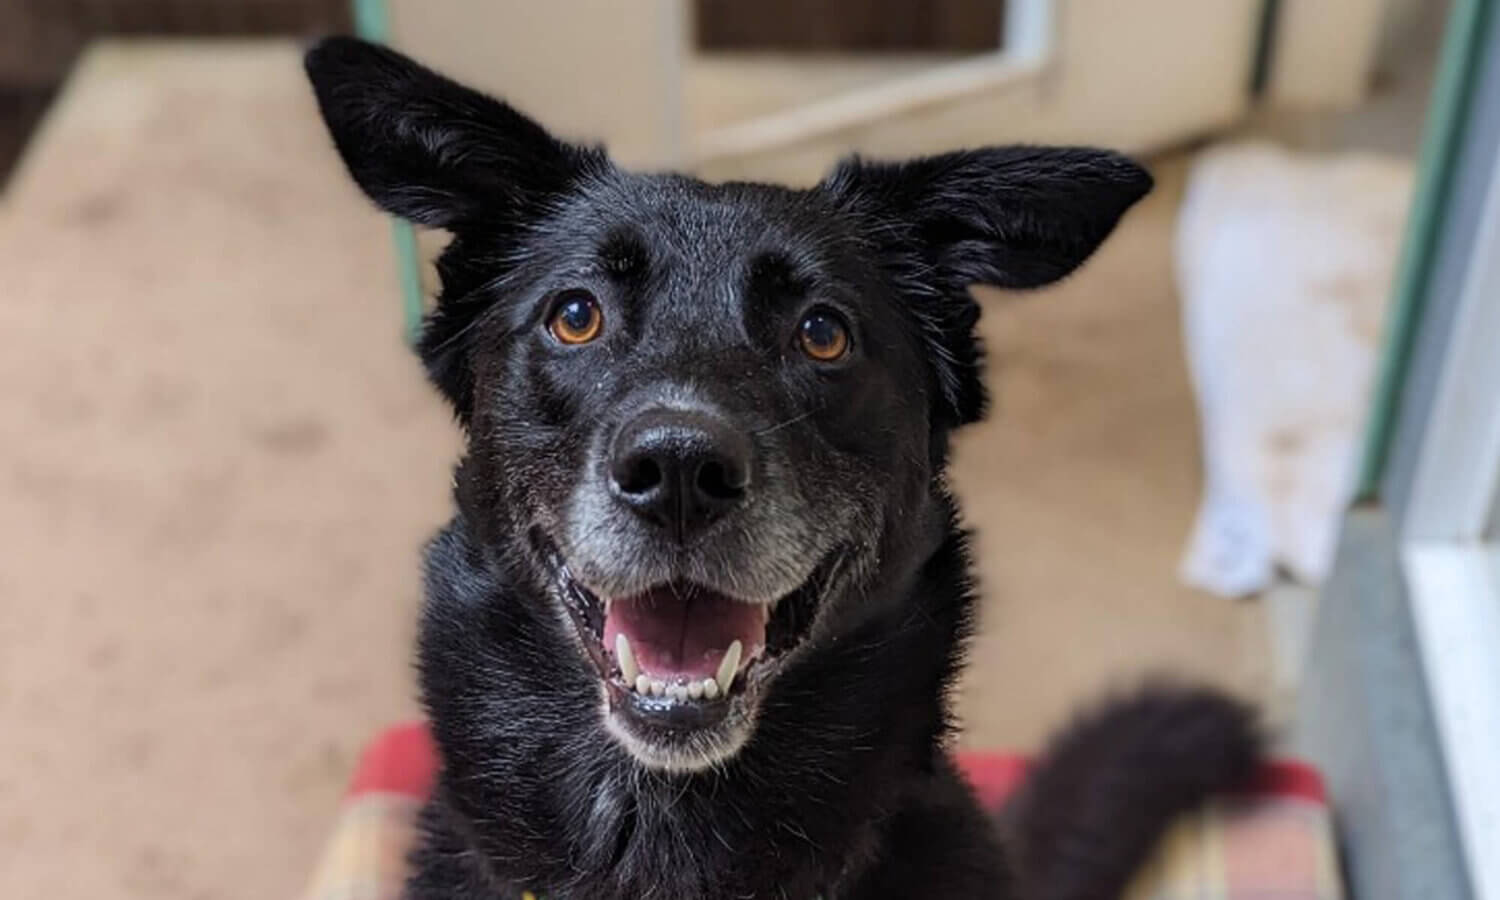 A black dog with perked ears and a happy expression.